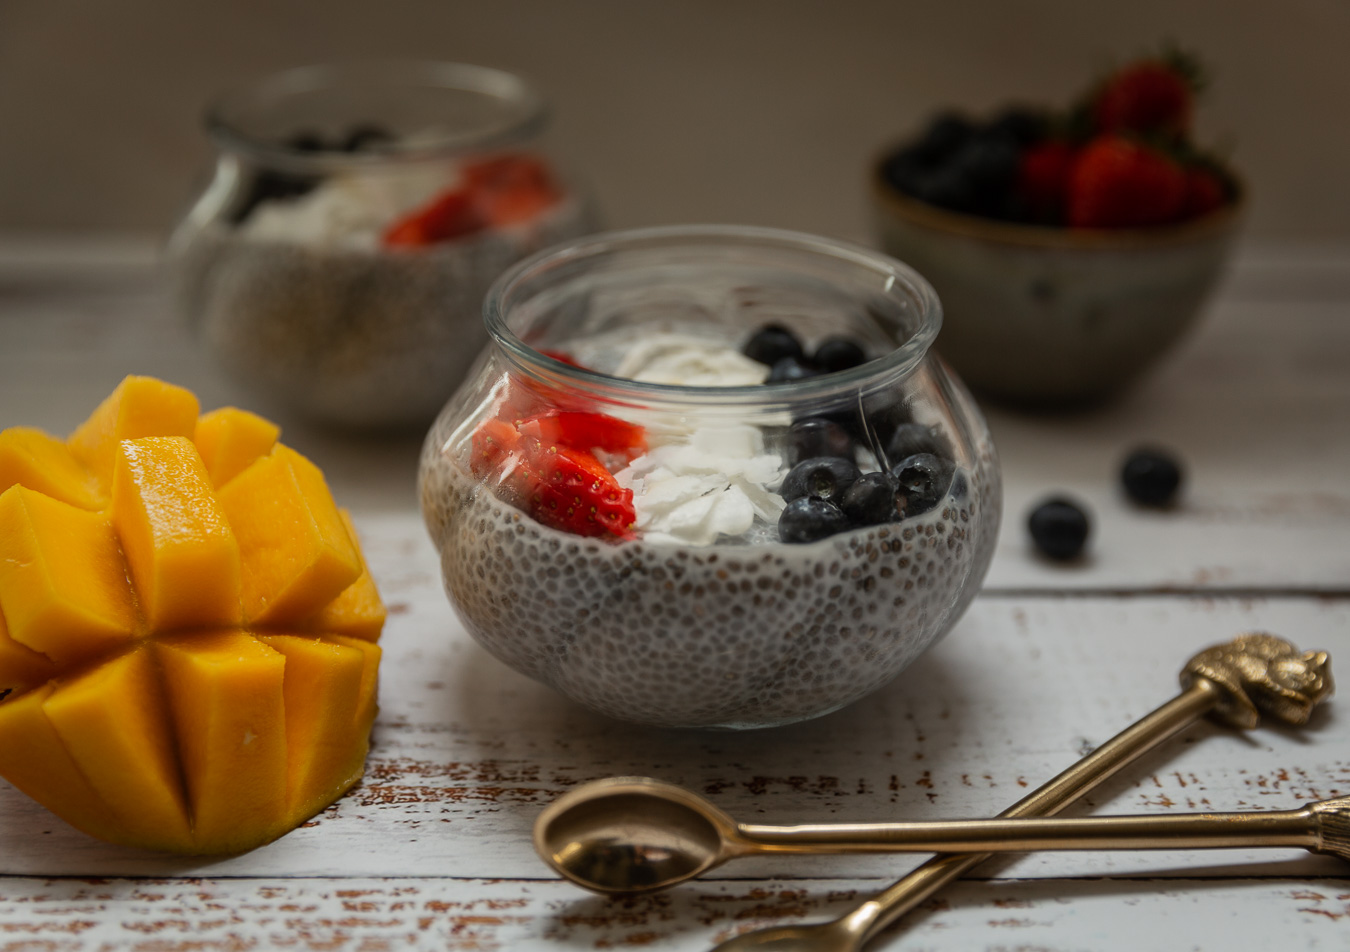 Coconut Chia Seed Pudding